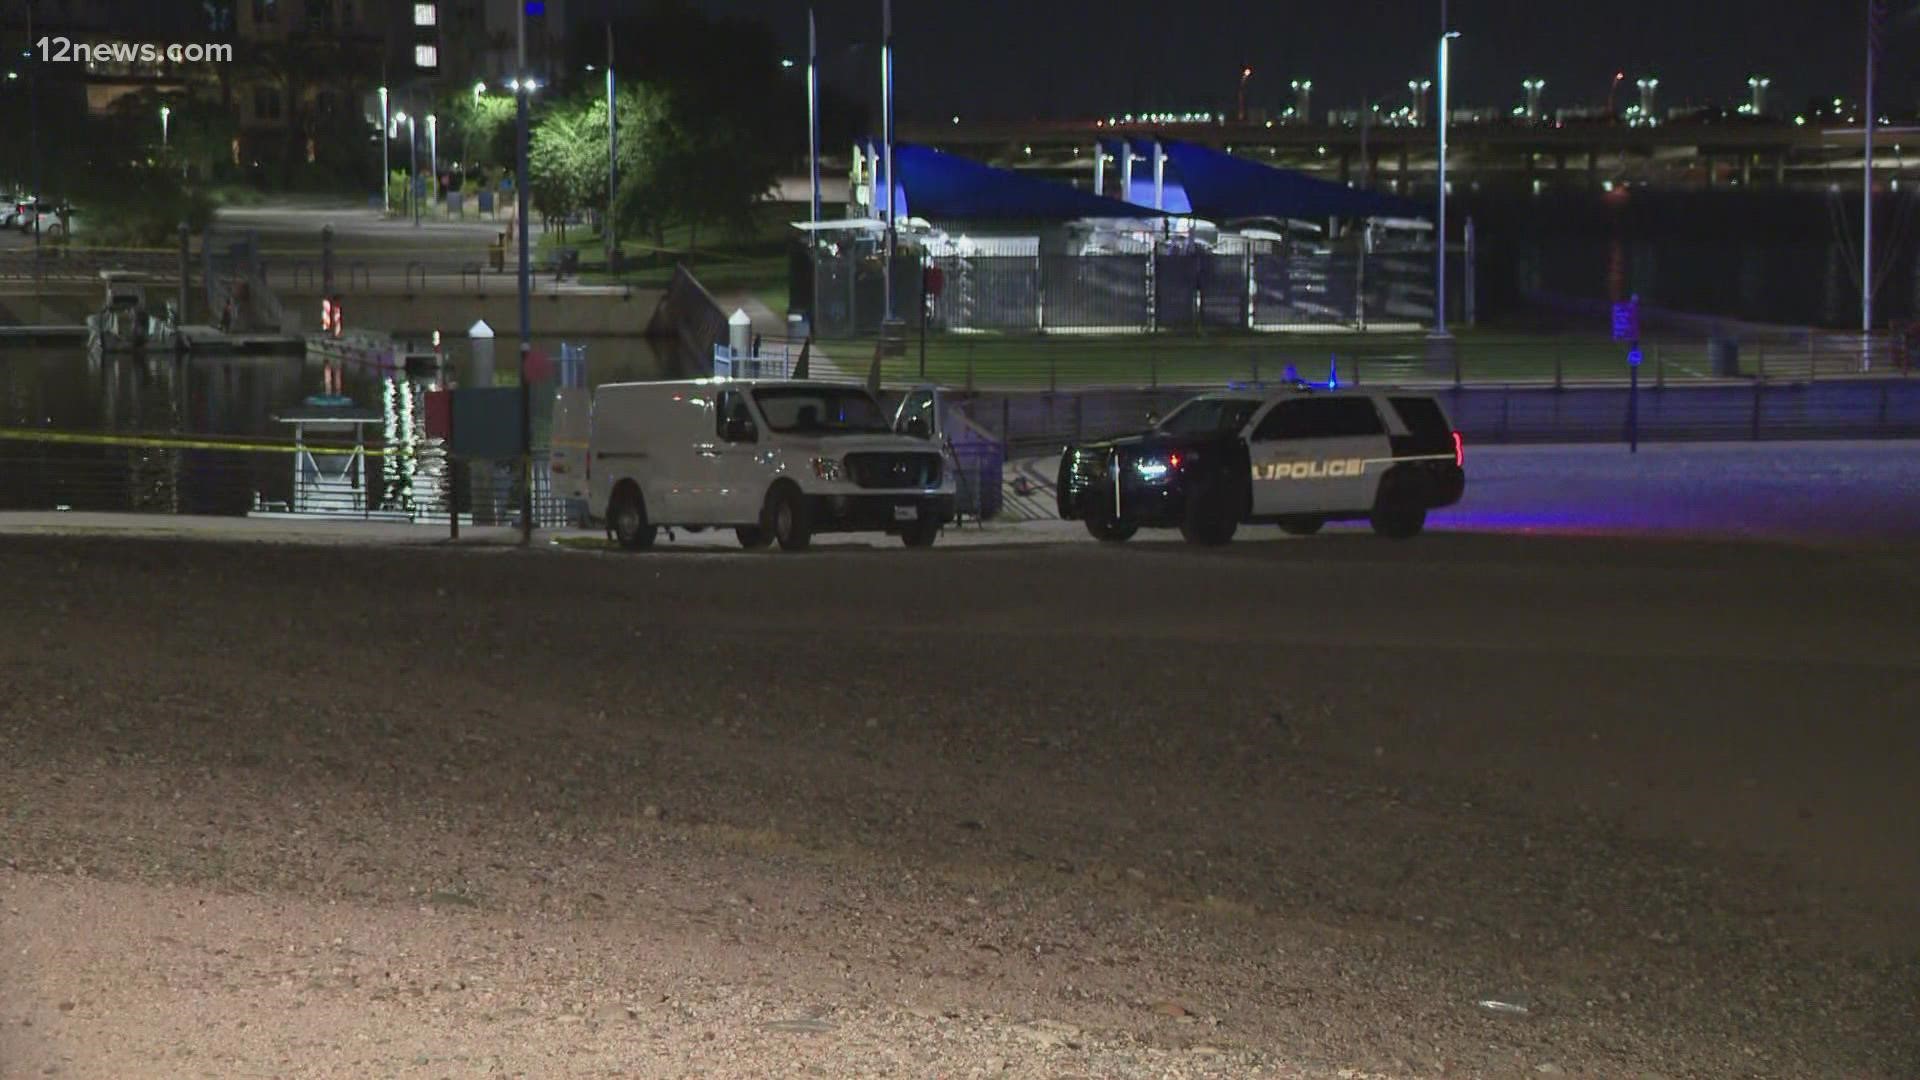 Officers received calls early Tuesday morning reporting that the 18-year-old jumped into the lake and did not resurface, the Tempe Police Department said.